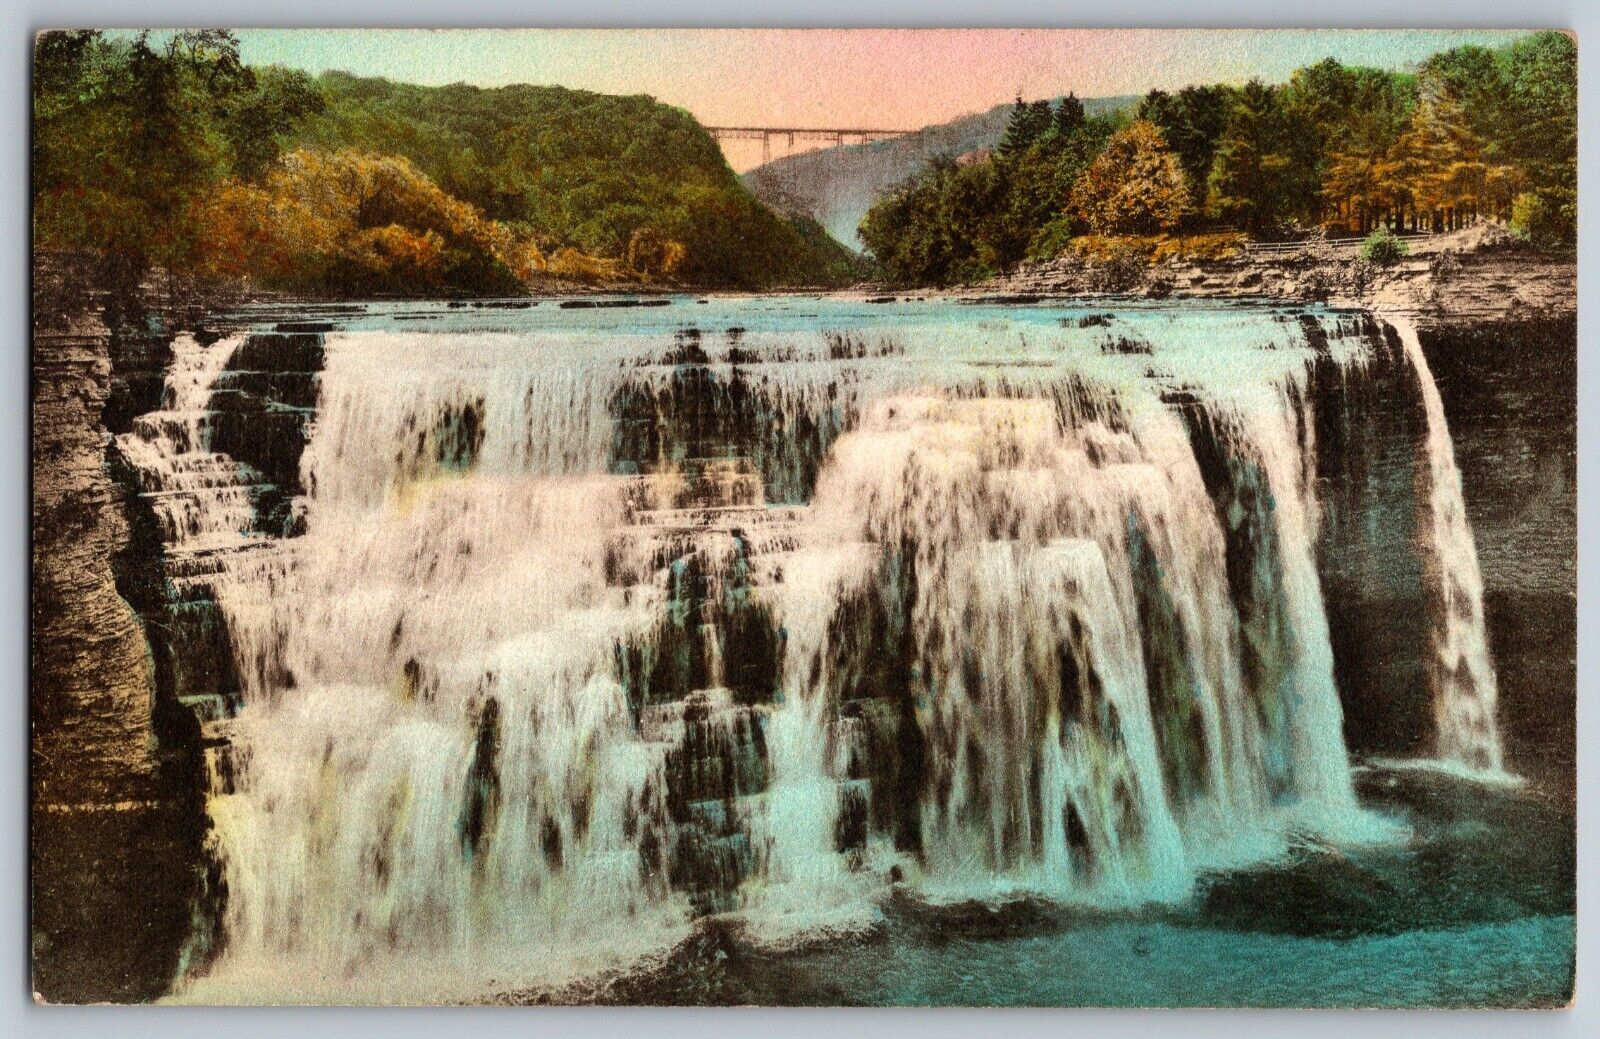 New York NY - Middle Falls at Letchworth State Park - Vintage Postcards